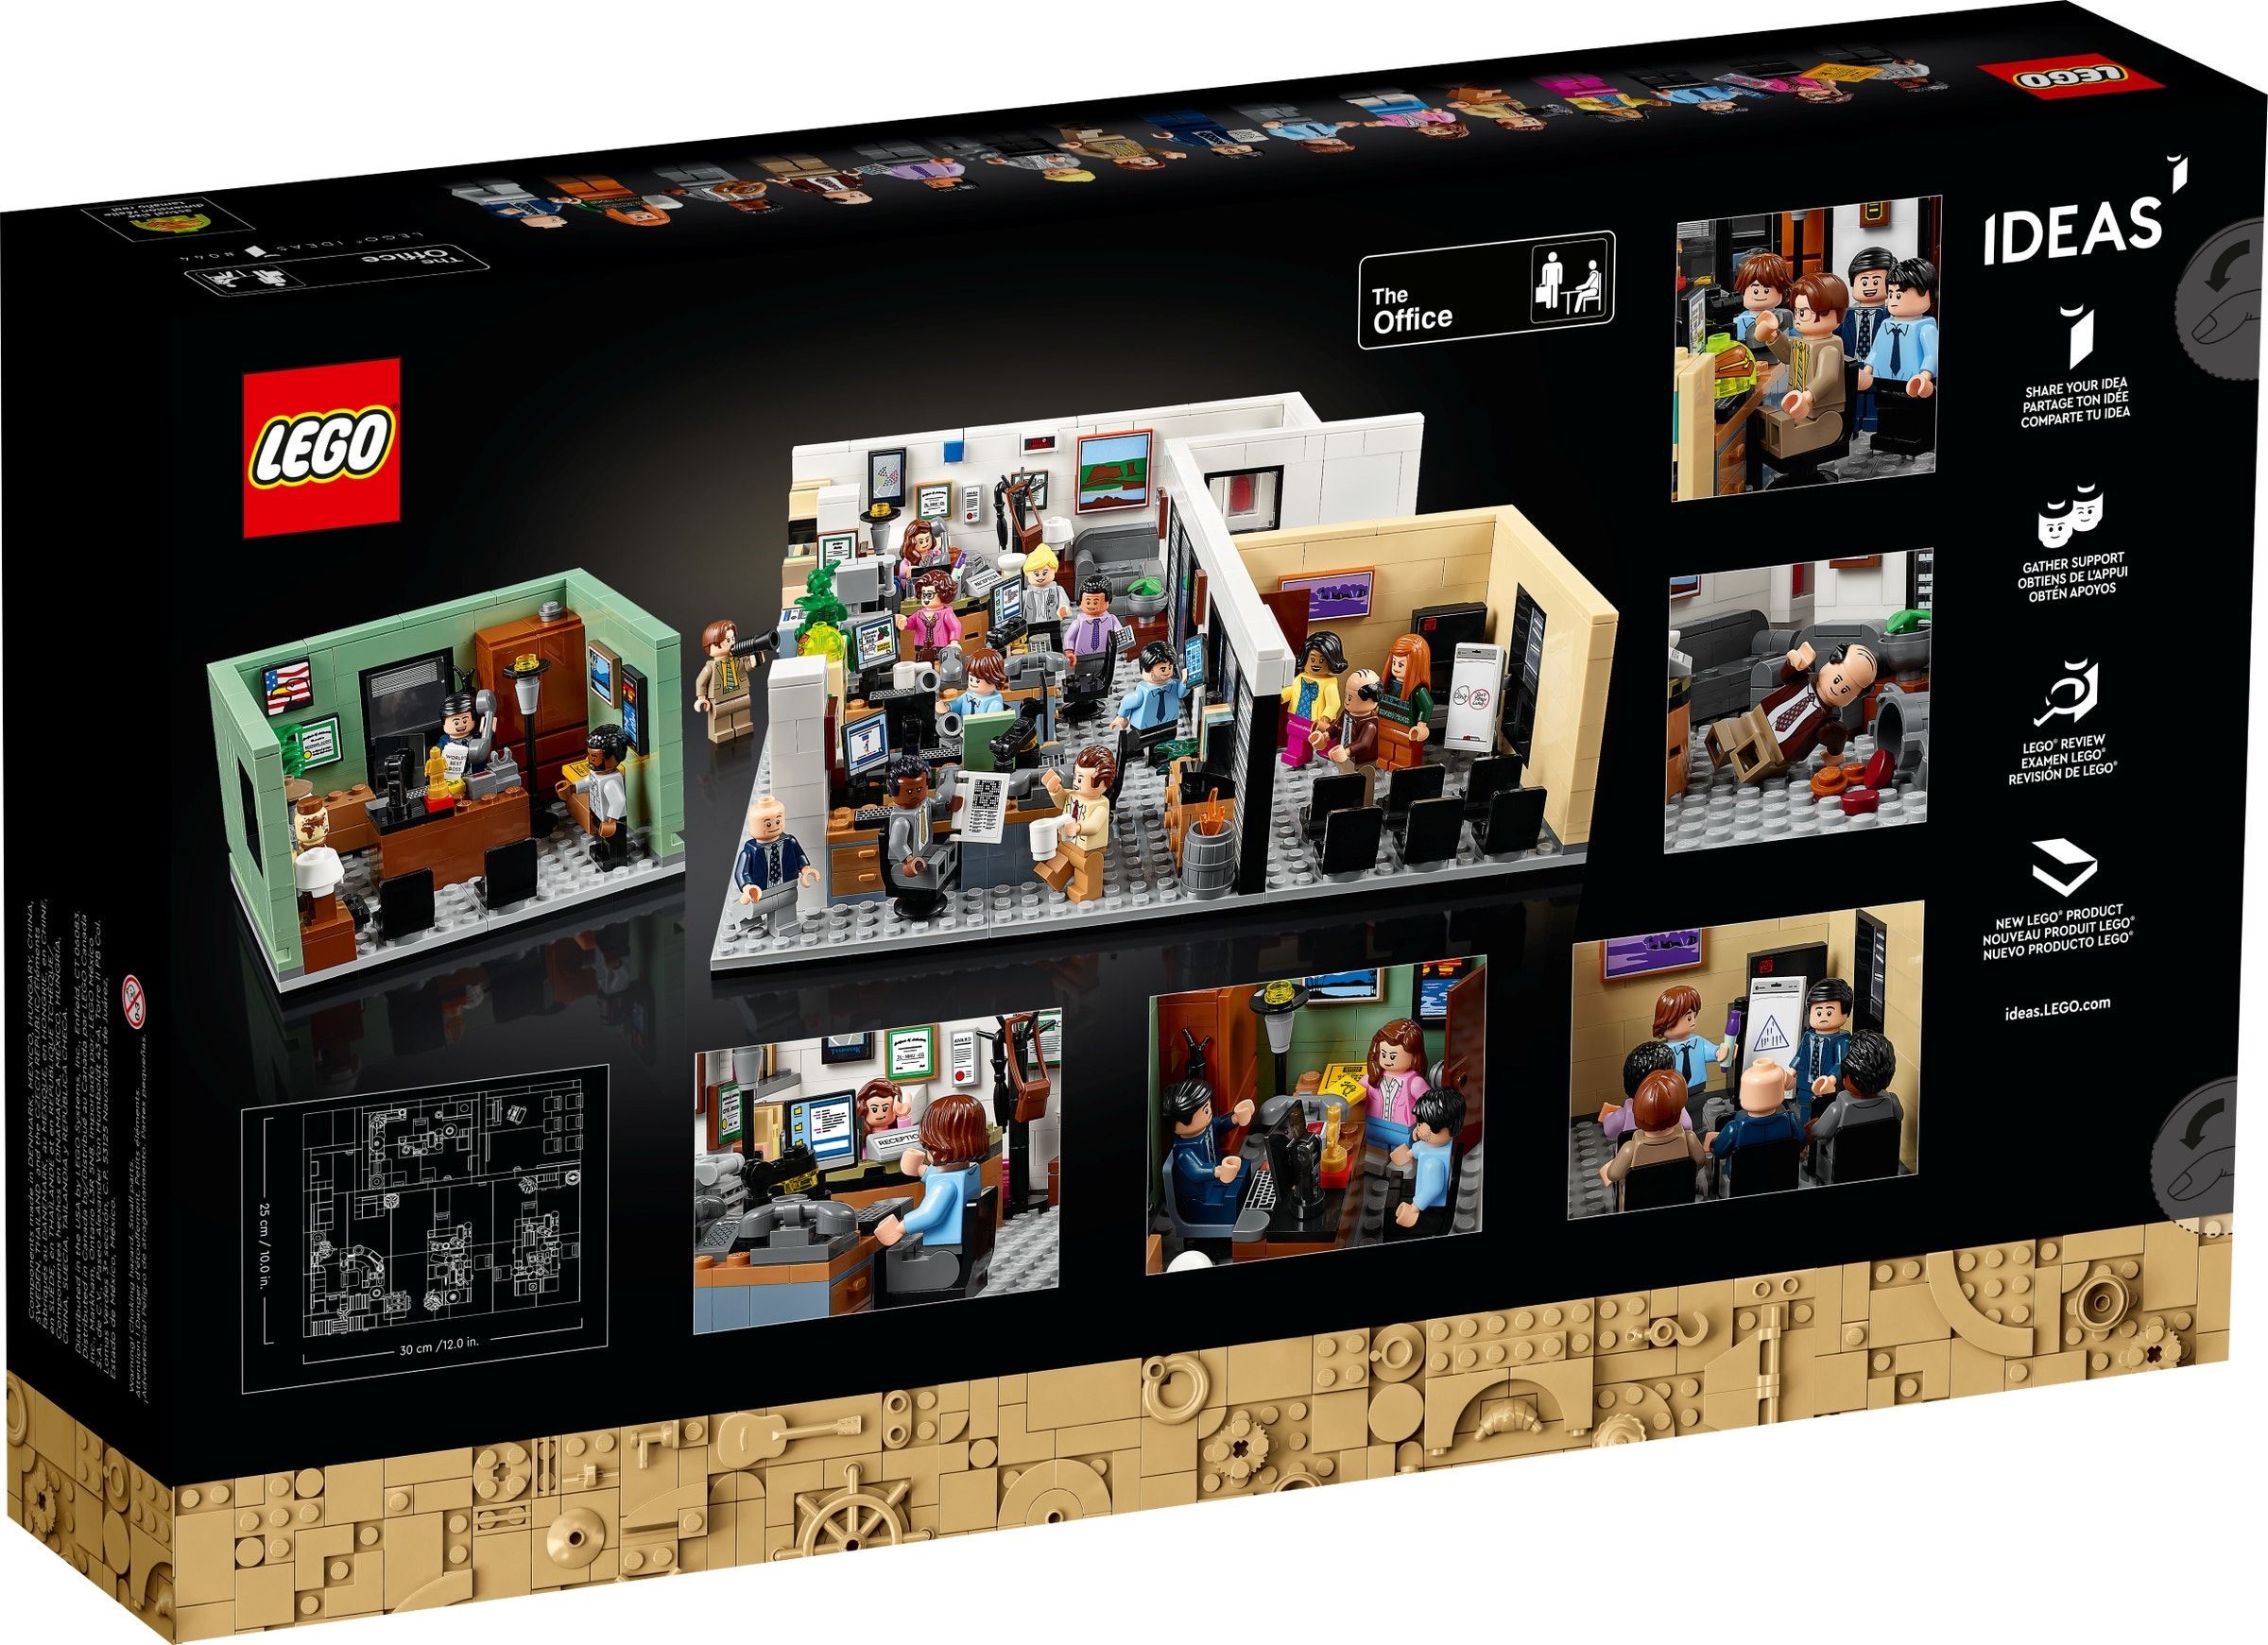 LEGO Ideas The Office (21336) Officially Announced - The Fan